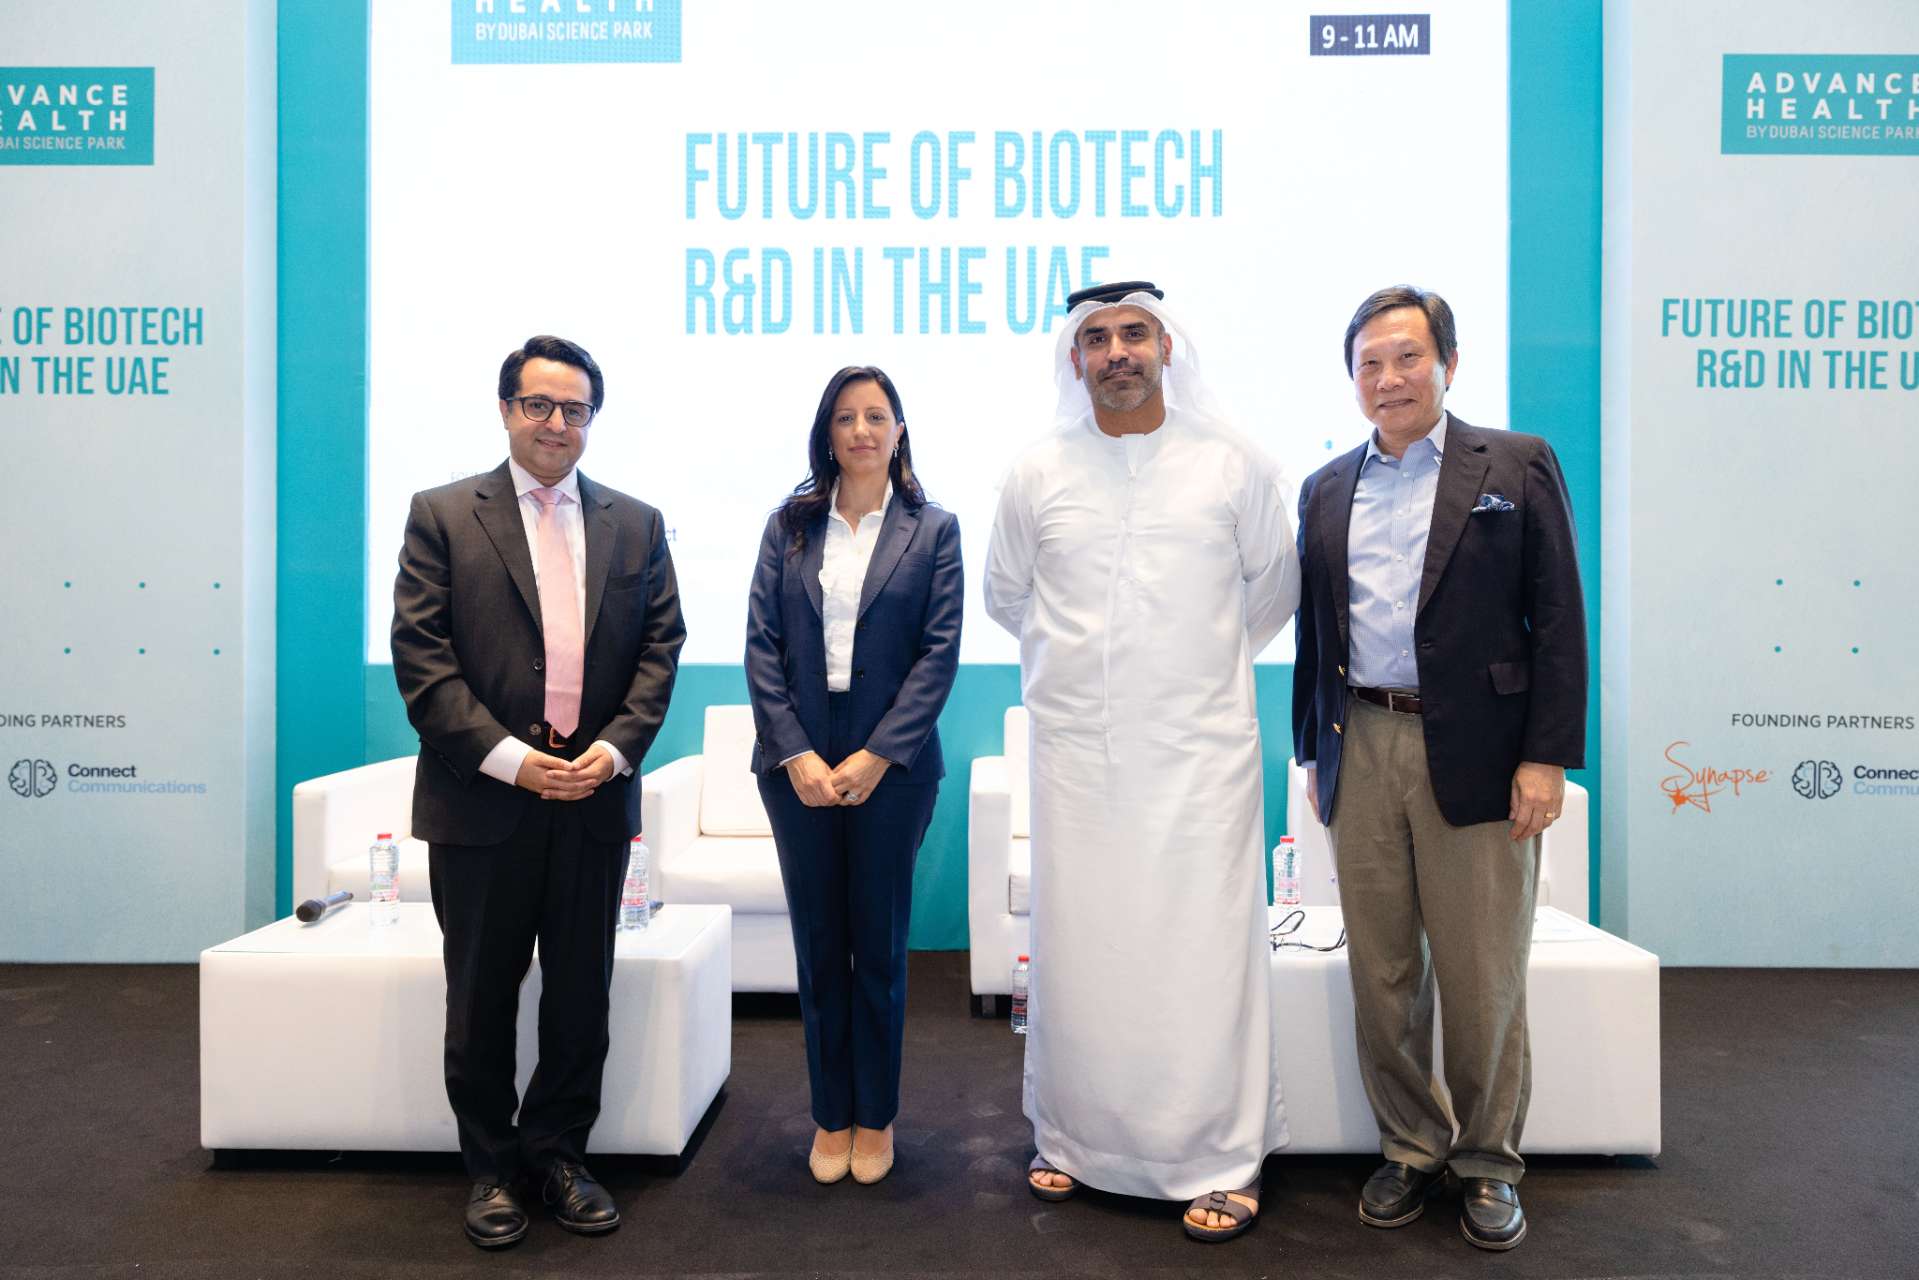 The Future of Biotech R&D in the UAE